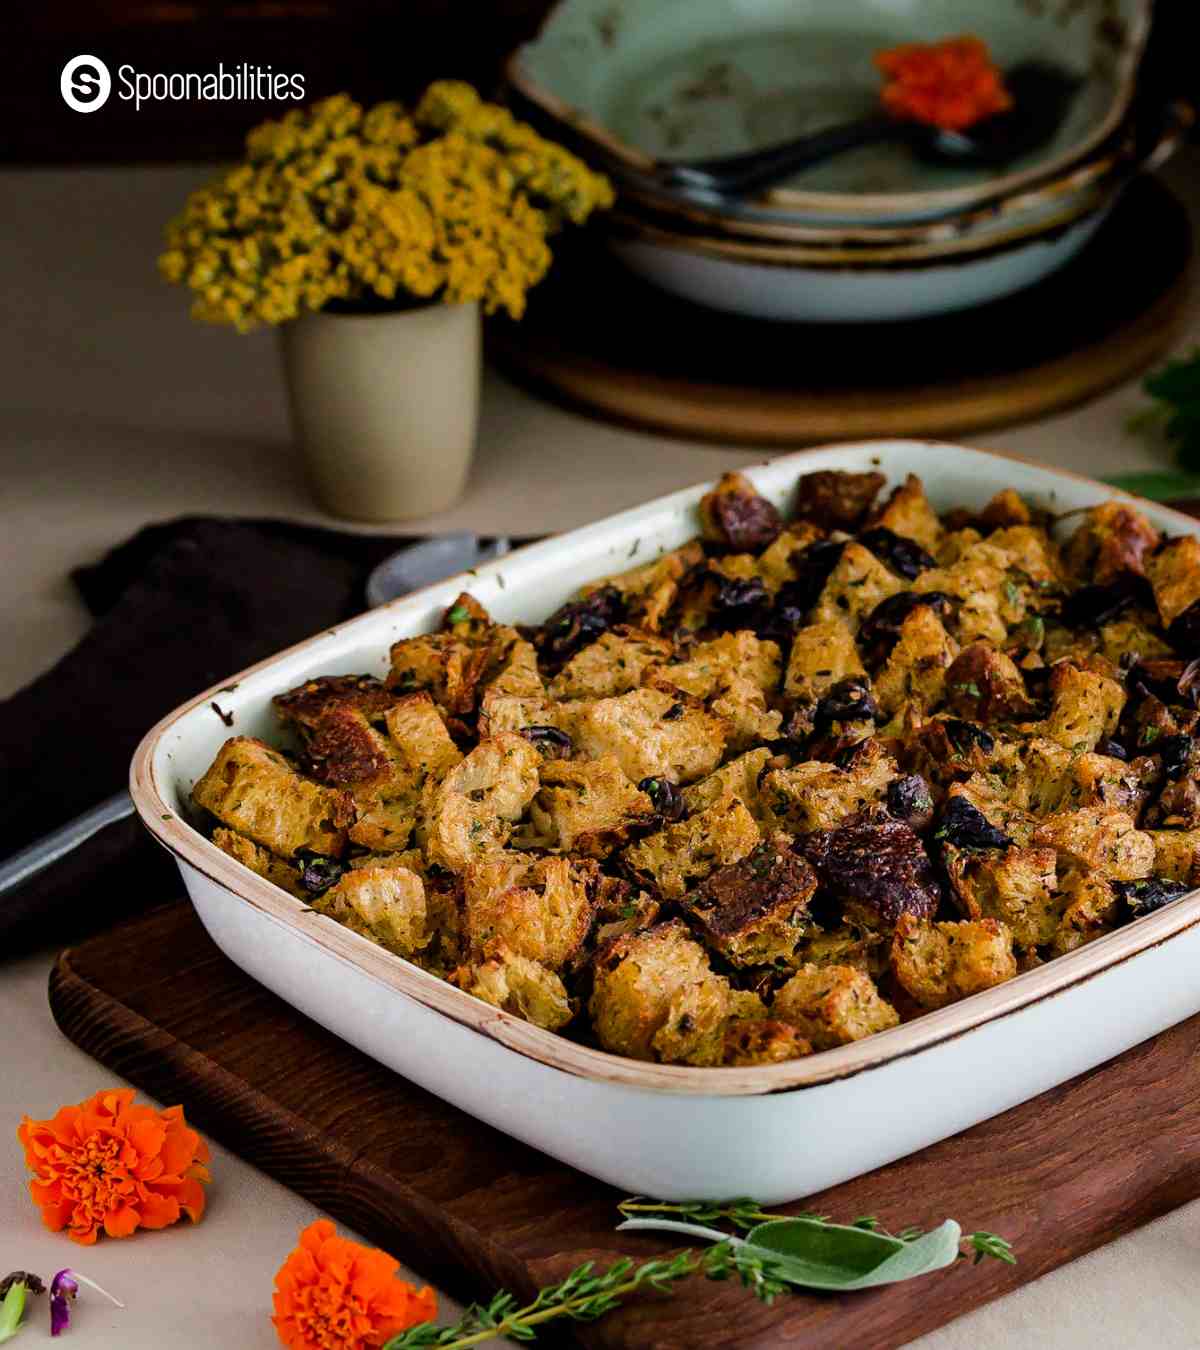 Mushroom stuffing in a baking dish with orange flowers in the foreground and yellow flowers in a pot at the background